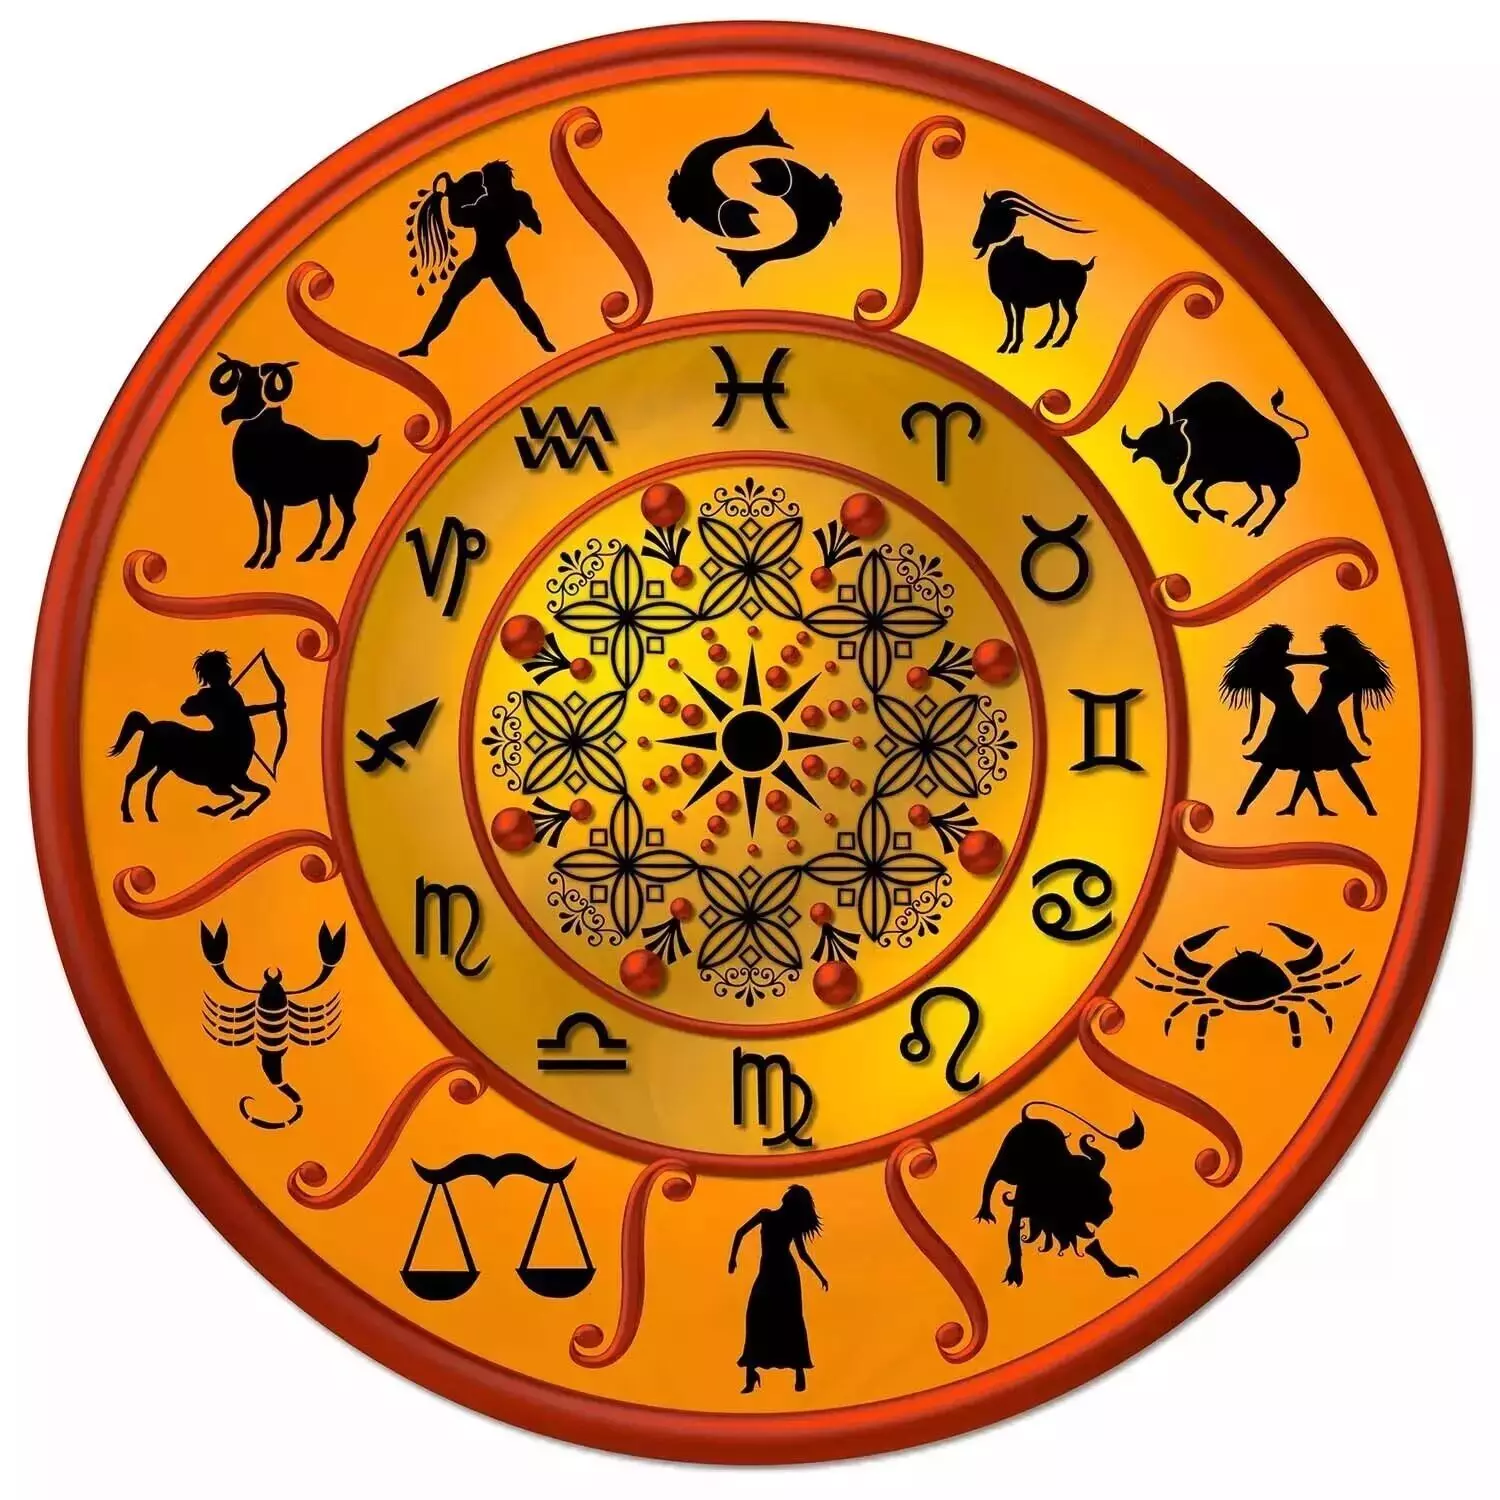 02 June  – Know your todays horoscope